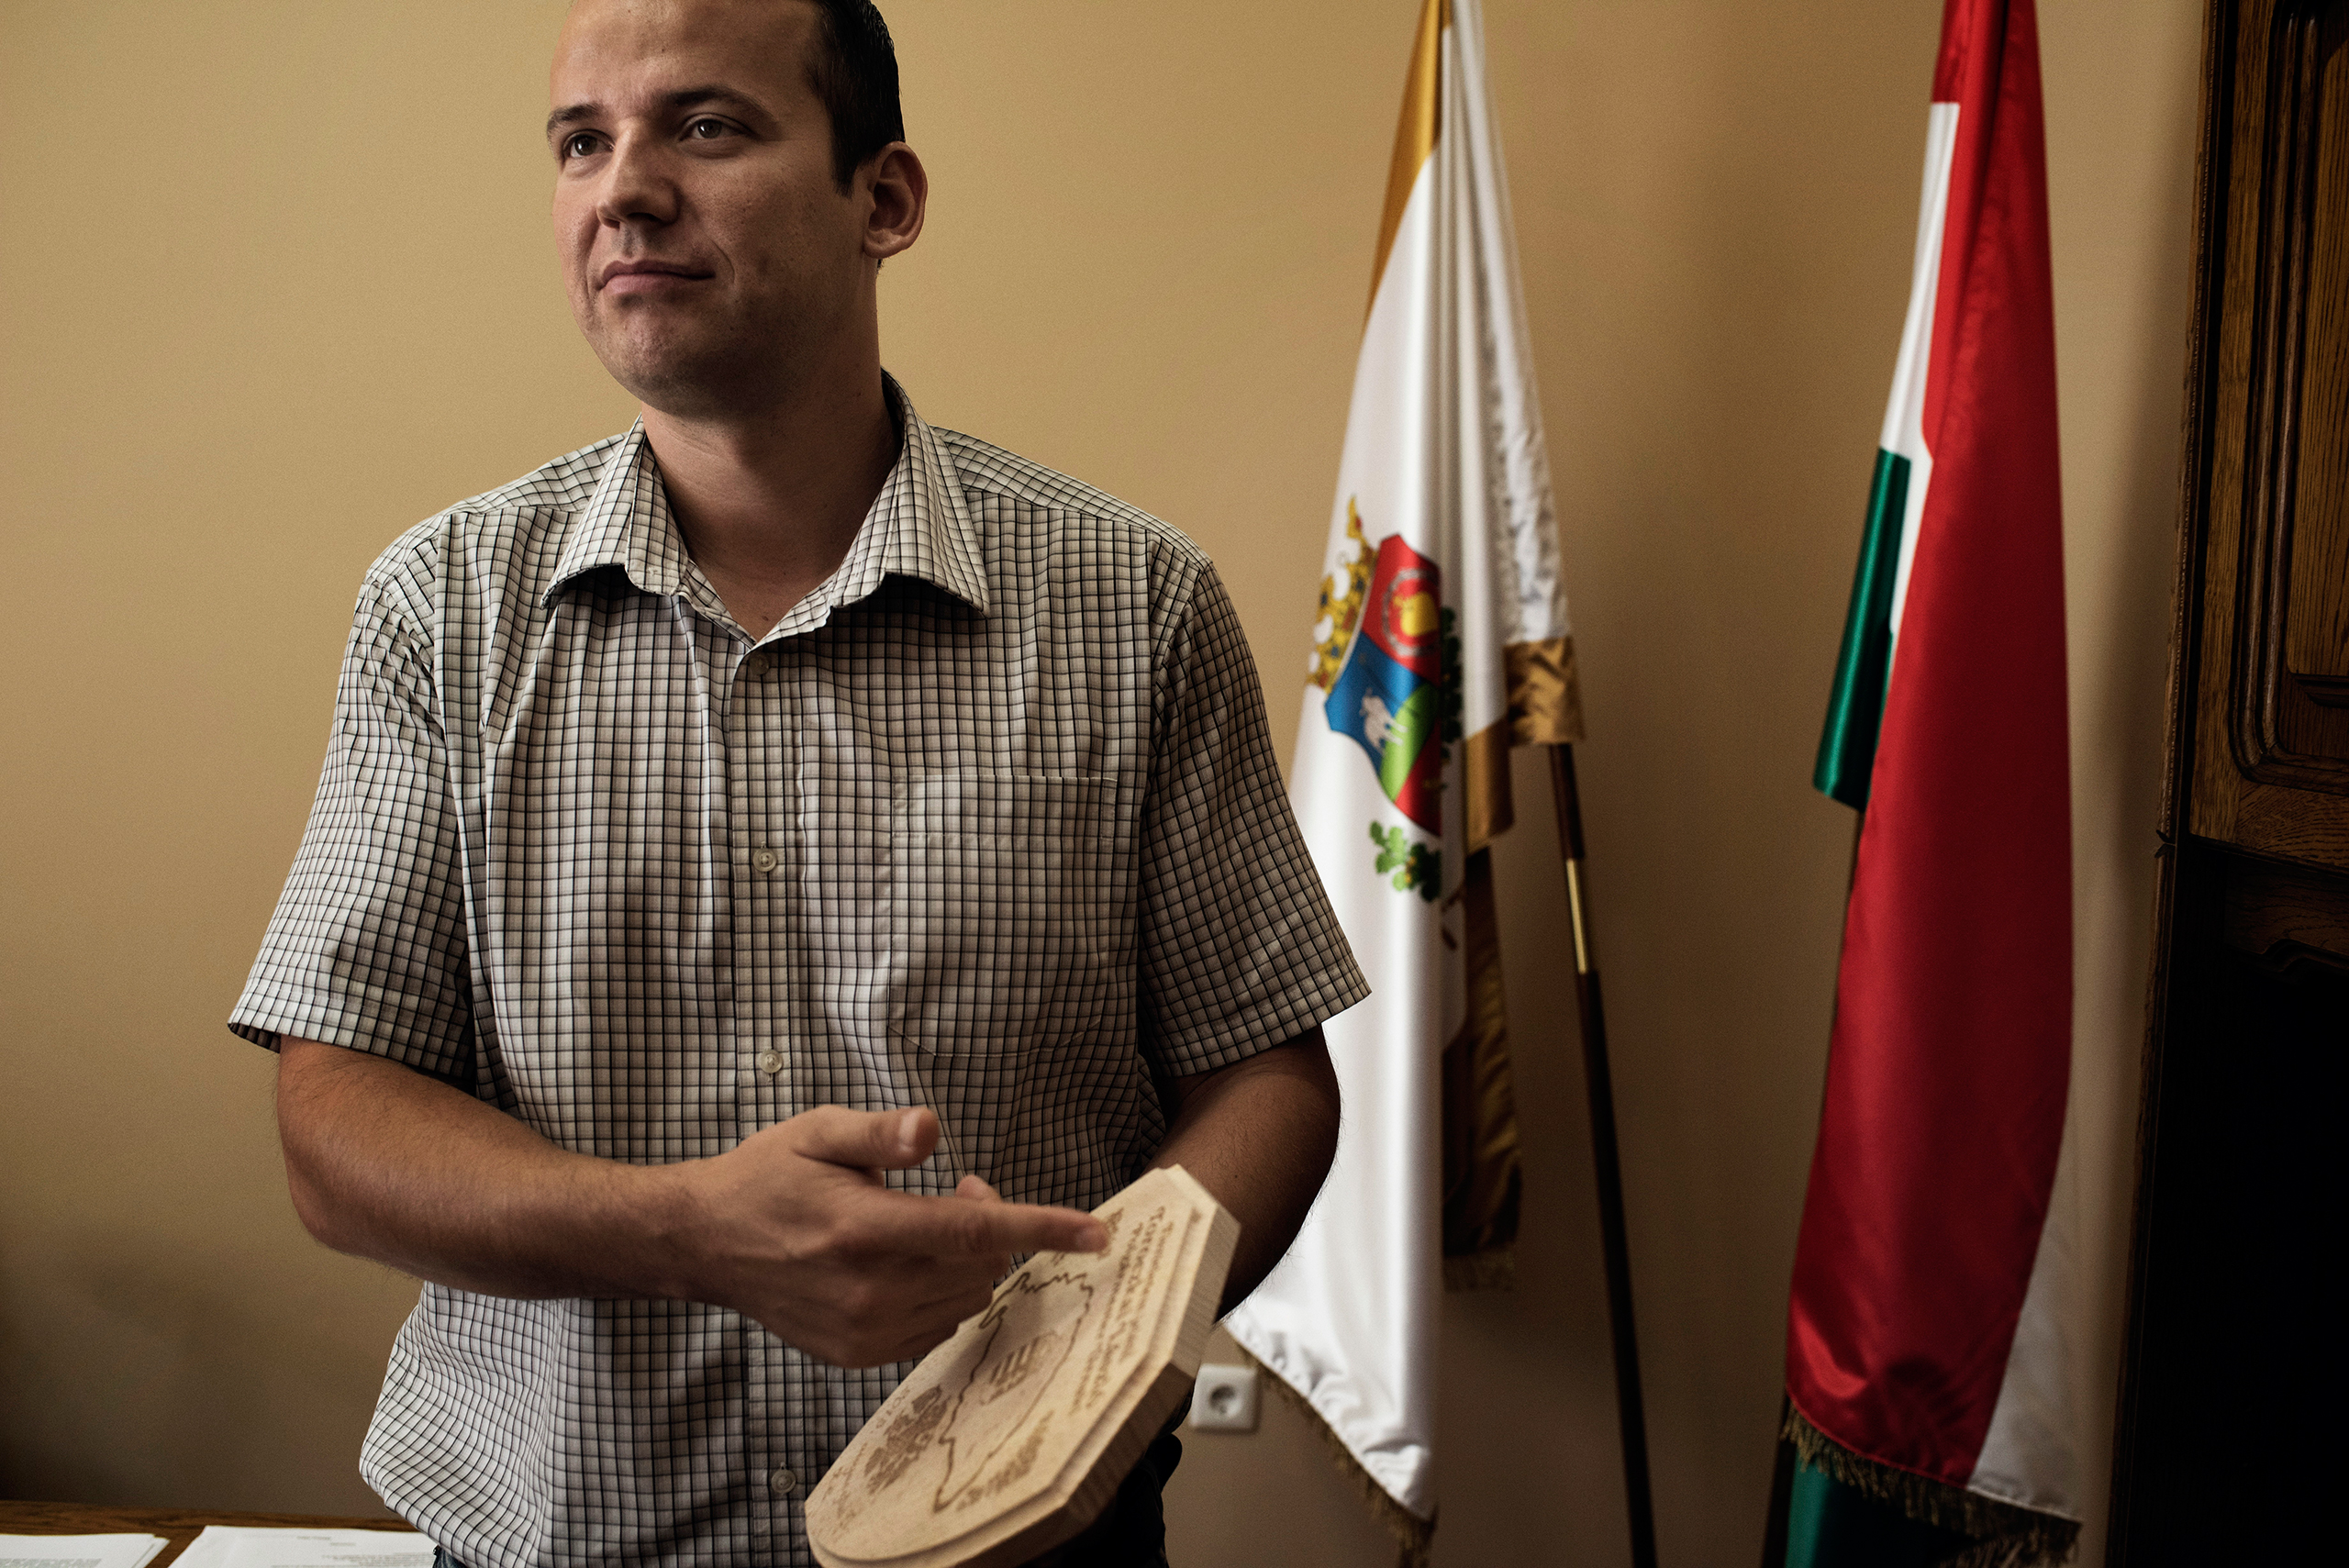 Laszlo Toroczkai, the charismatic young mayor of a Hungarian town right on the border with Serbia, in Asotthalom, September 2015. Toroczkai became a national celebrity for his extreme anti-migration and anti-Islamic views. (Yuri Kozyrev—NOOR for TIME)